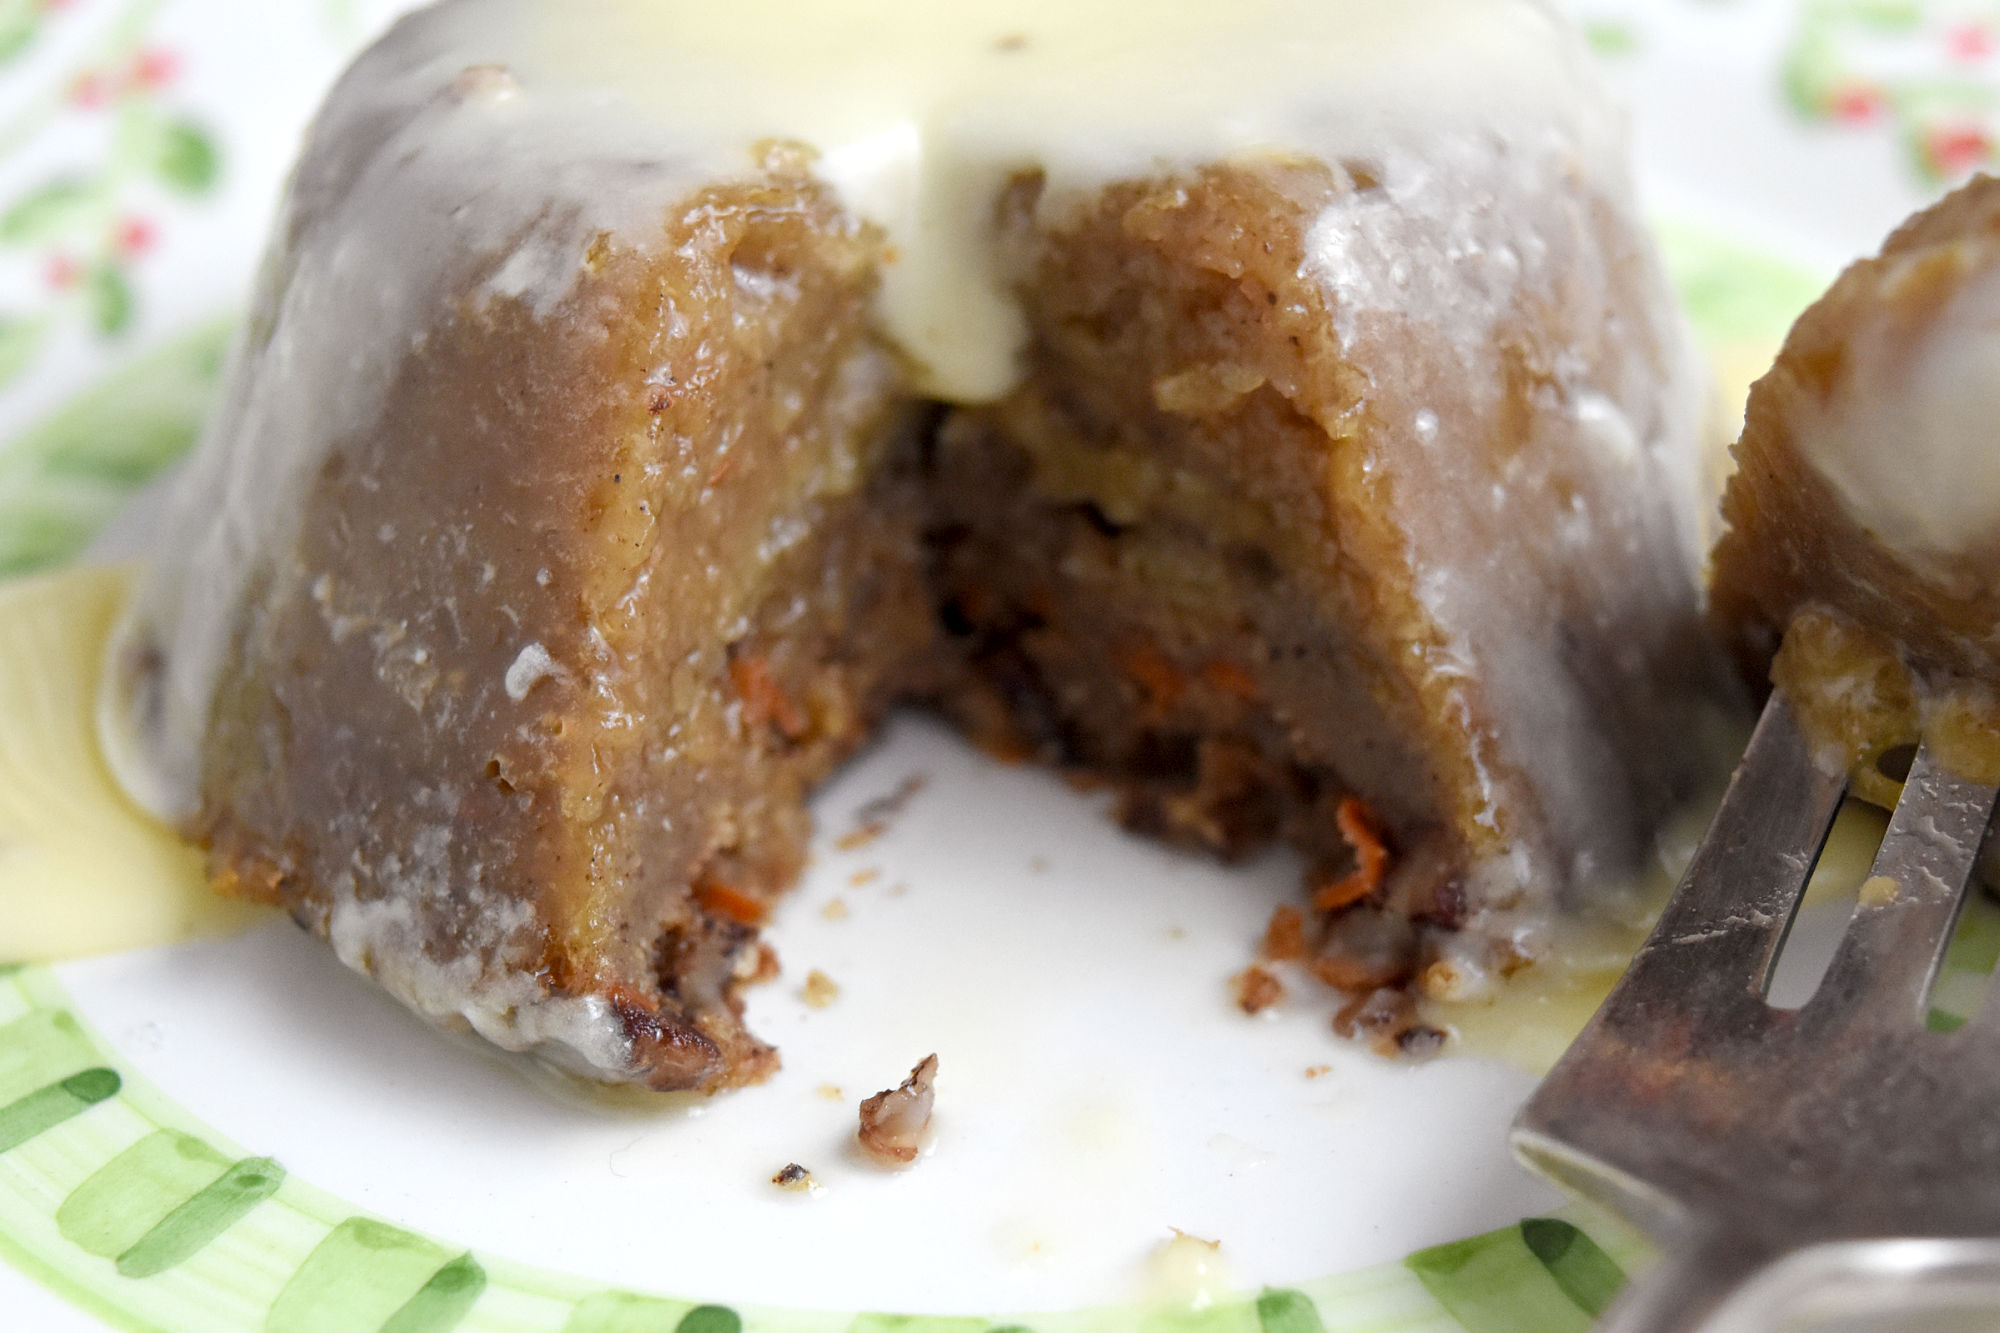 Individual Steamed Puddings are a twist on a traditional European steamed Christmas pudding.  Baked in the oven in a bain marie, or water bath, they are moist, delicious, and full of old-world holiday flavors. #ChristmasSweetsWeek #steamedpudding #Christmaspudding #easysteamedpudding